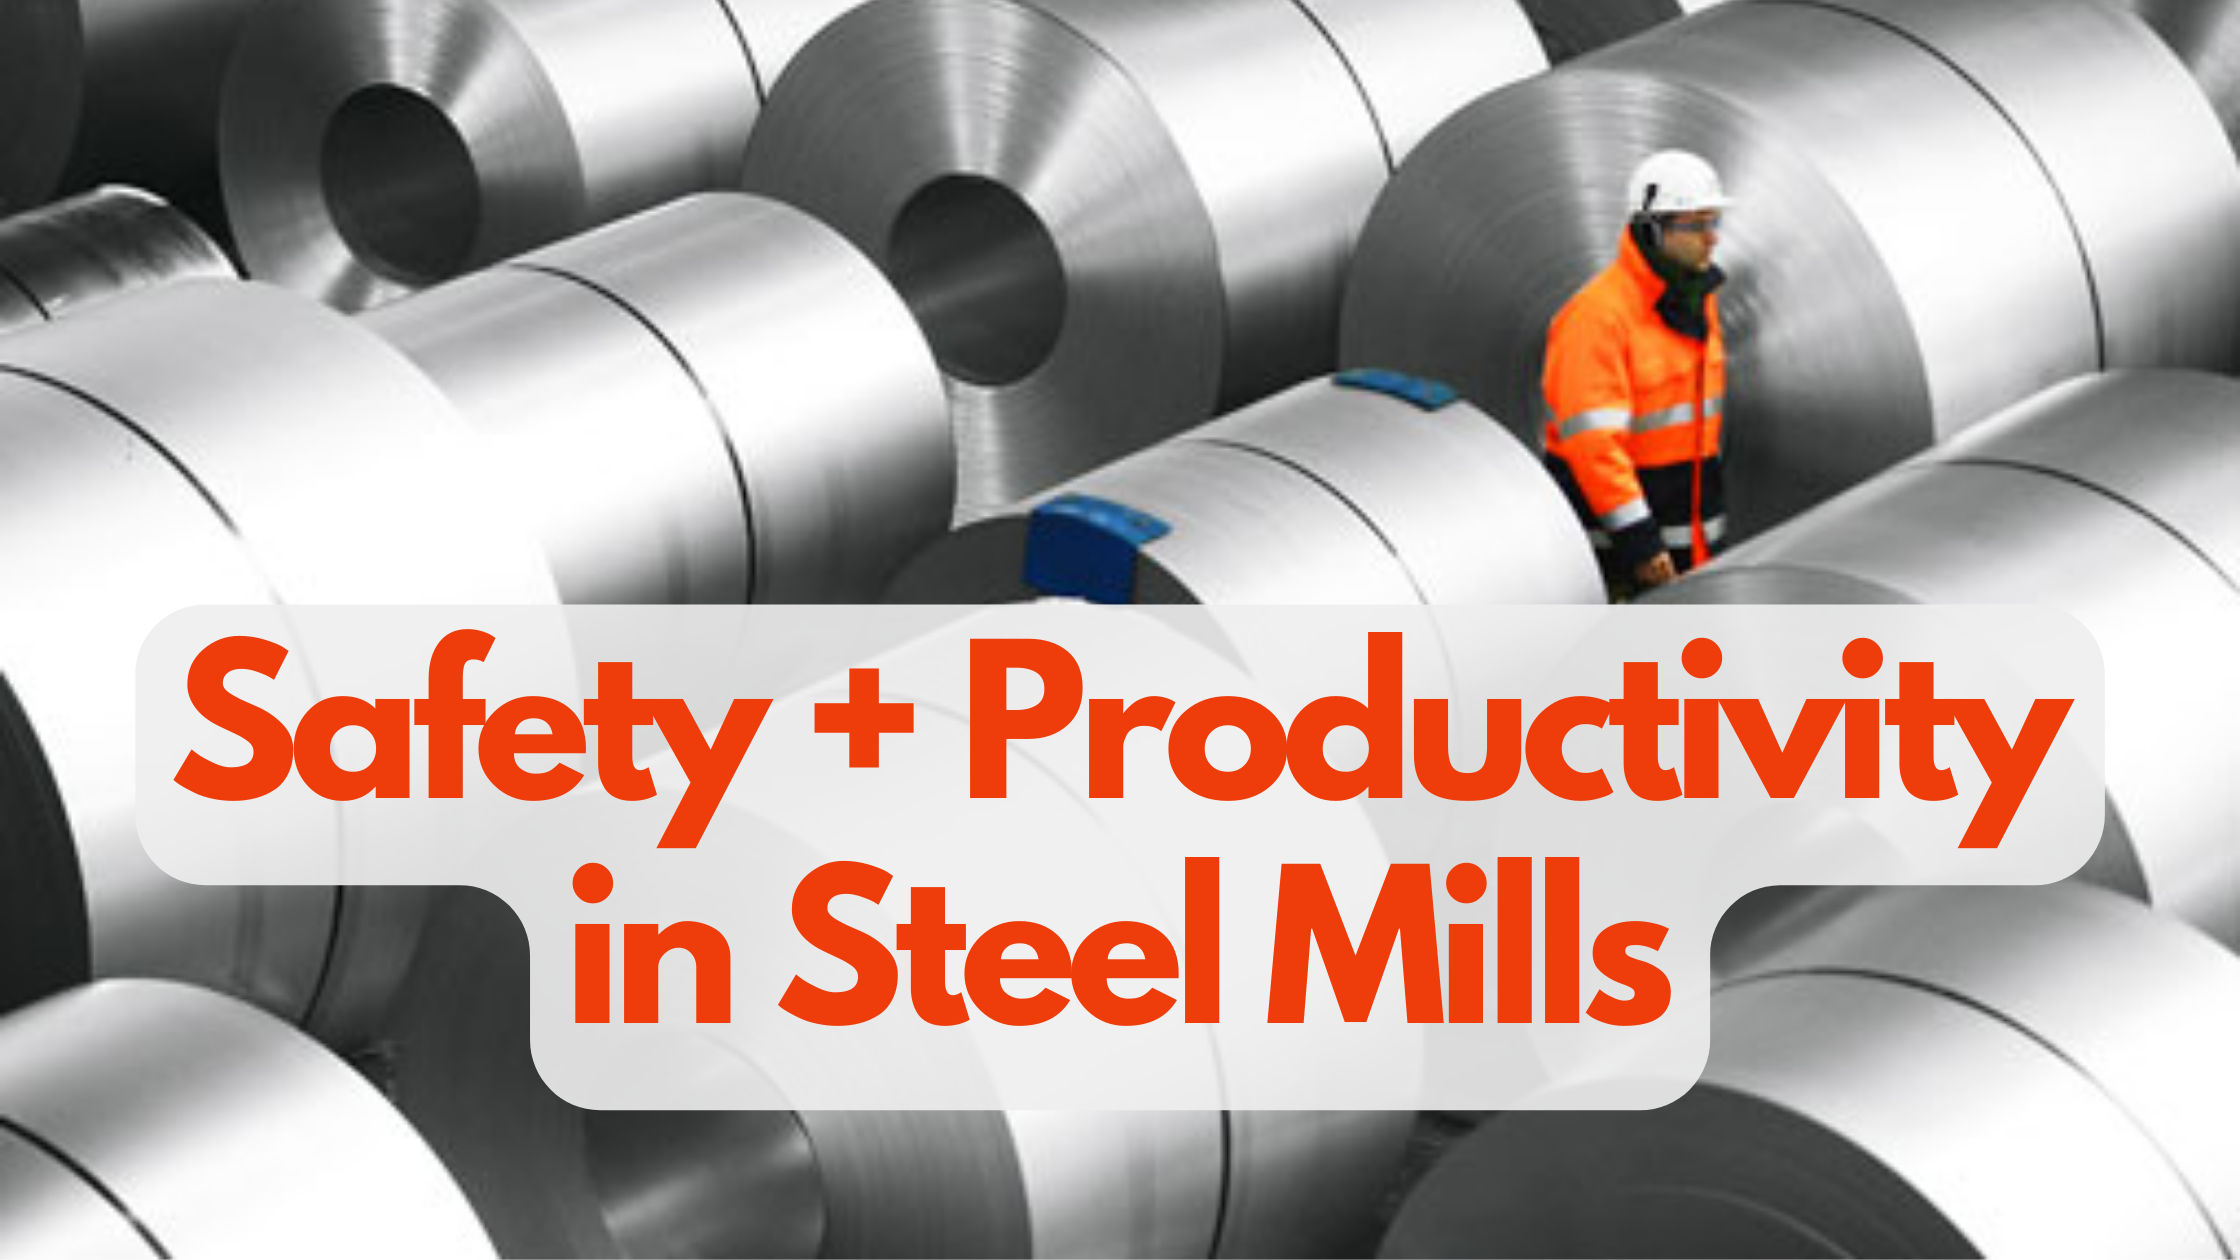 Improving Safety and Productivity in the Steel Industry